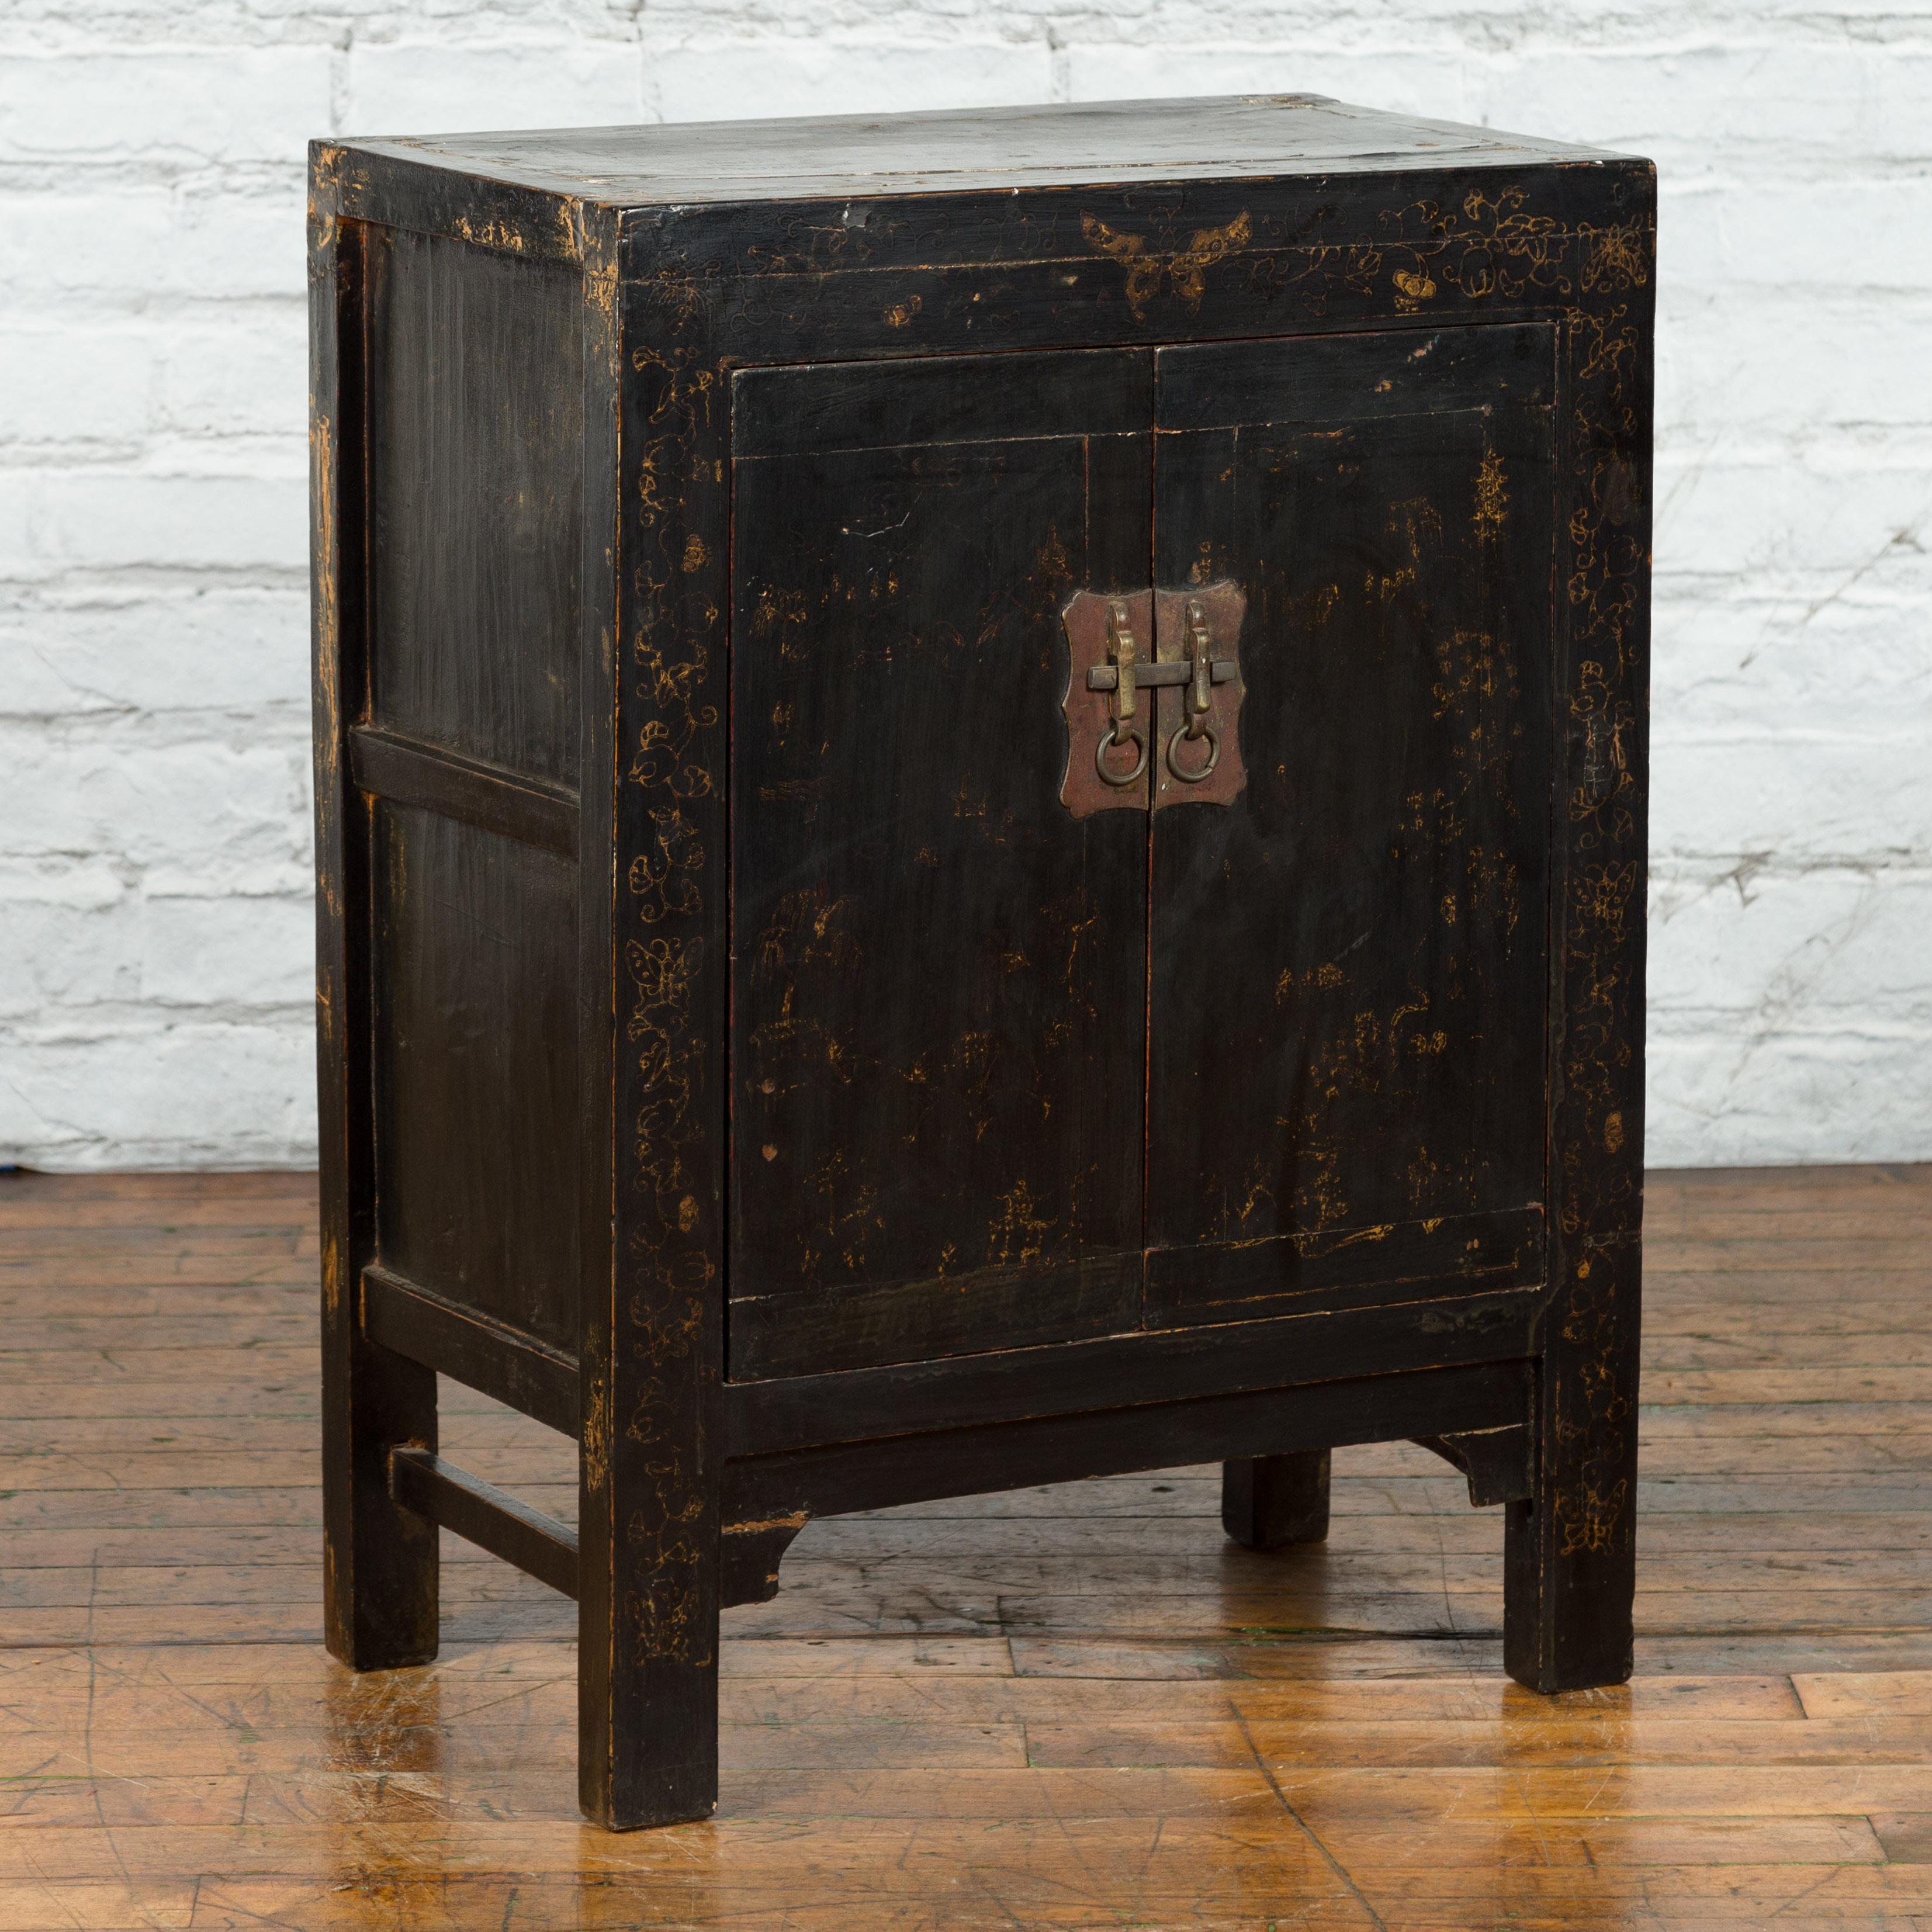 A Chinese Qing Dynasty period side cabinet from the 19th century, with original lacquer and faint painted décor. Created in China during the Qing Dynasty period, this side cabinet features a linear silhouette beautifully complimented by its original